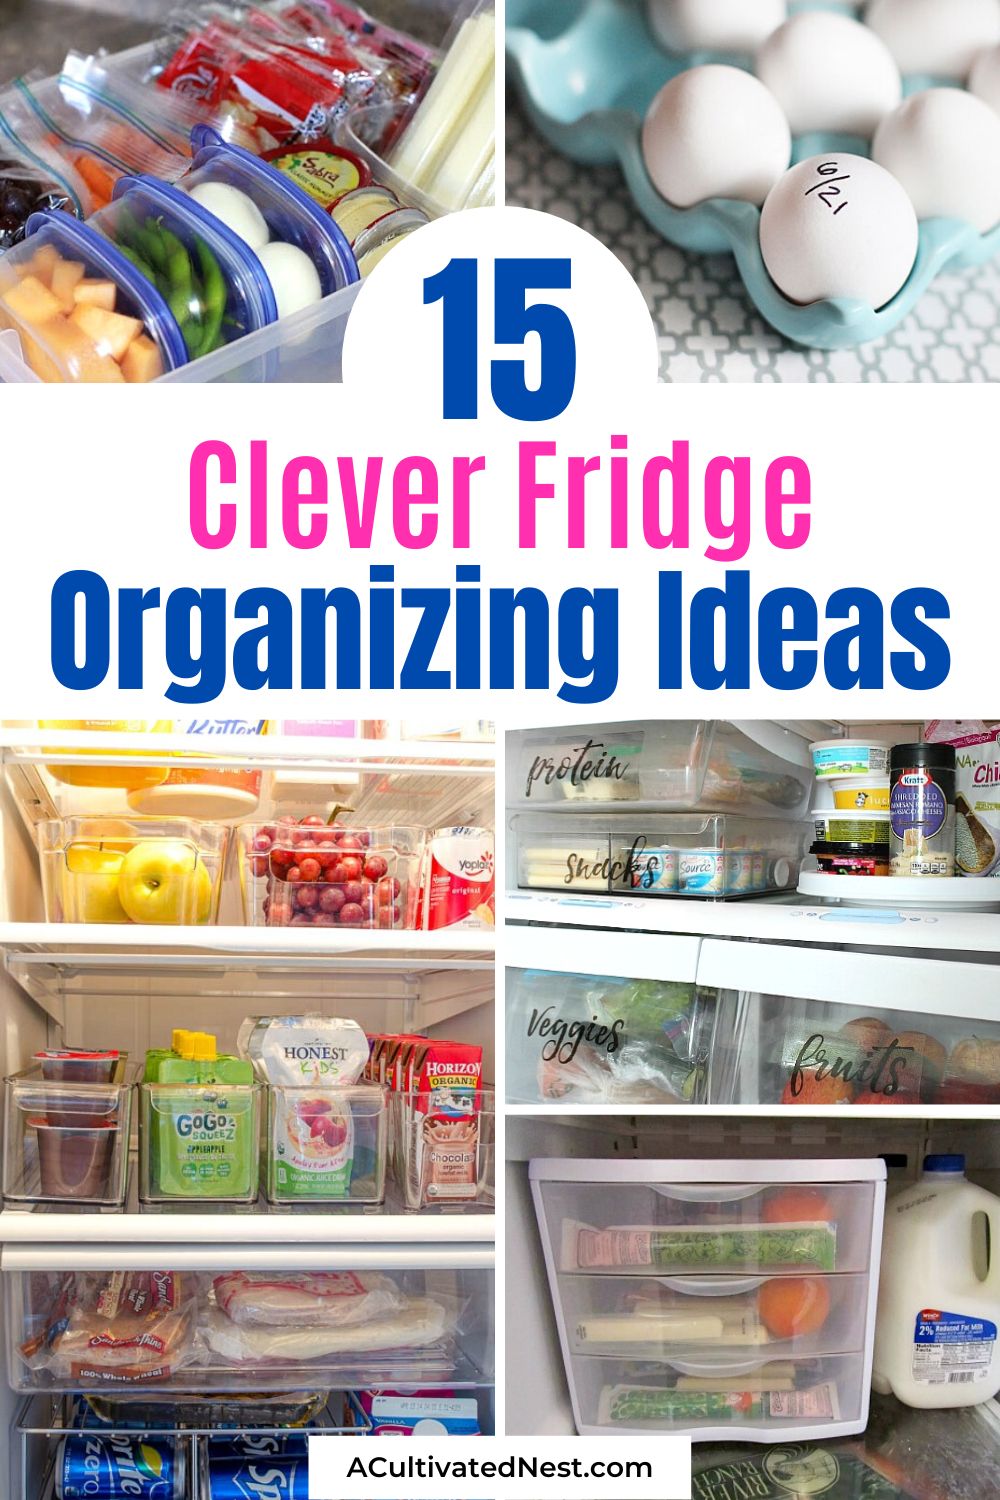 15 Clever Refrigerator Organizing Ideas- Tired of your disorganized fridge? Then you'll love these clever fridge organizing ideas! They'll help get you organized, and gain fridge space! | #organization #homeOrganization #kitchenOrganizing #fridgeOrganization #ACultivatedNest